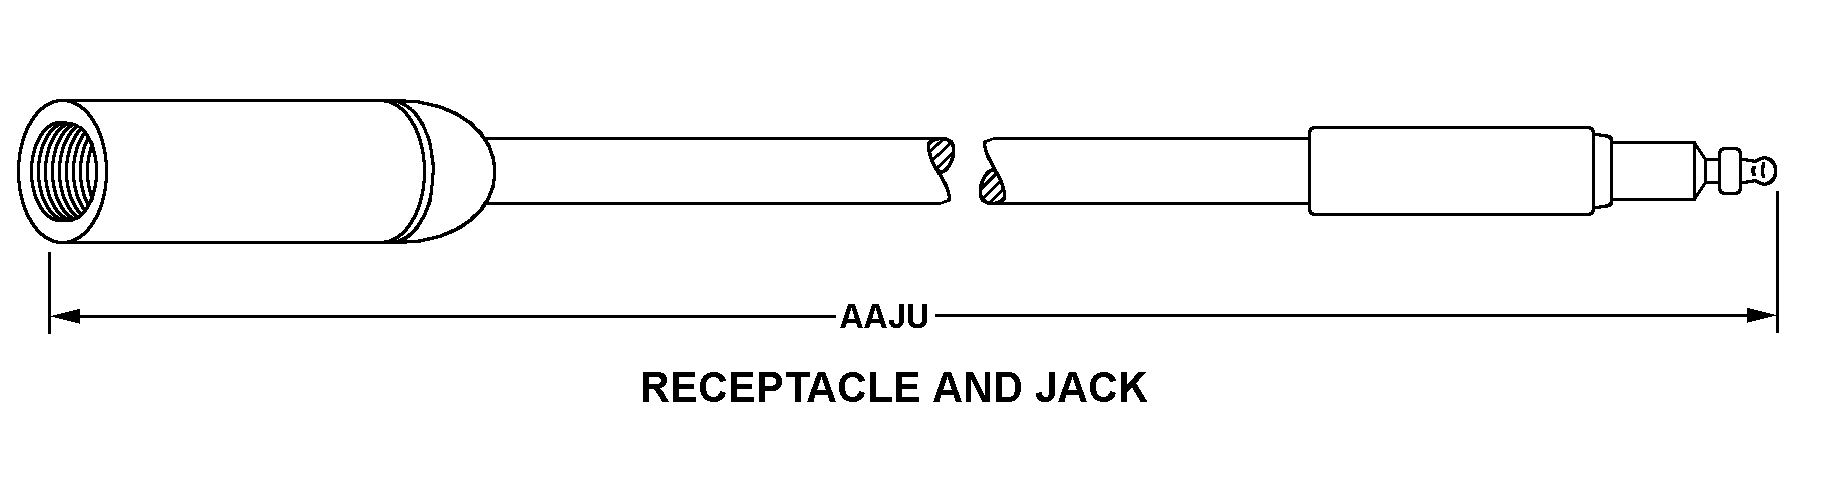 RECEPTACLE AND JACK style nsn 5995-01-006-9923